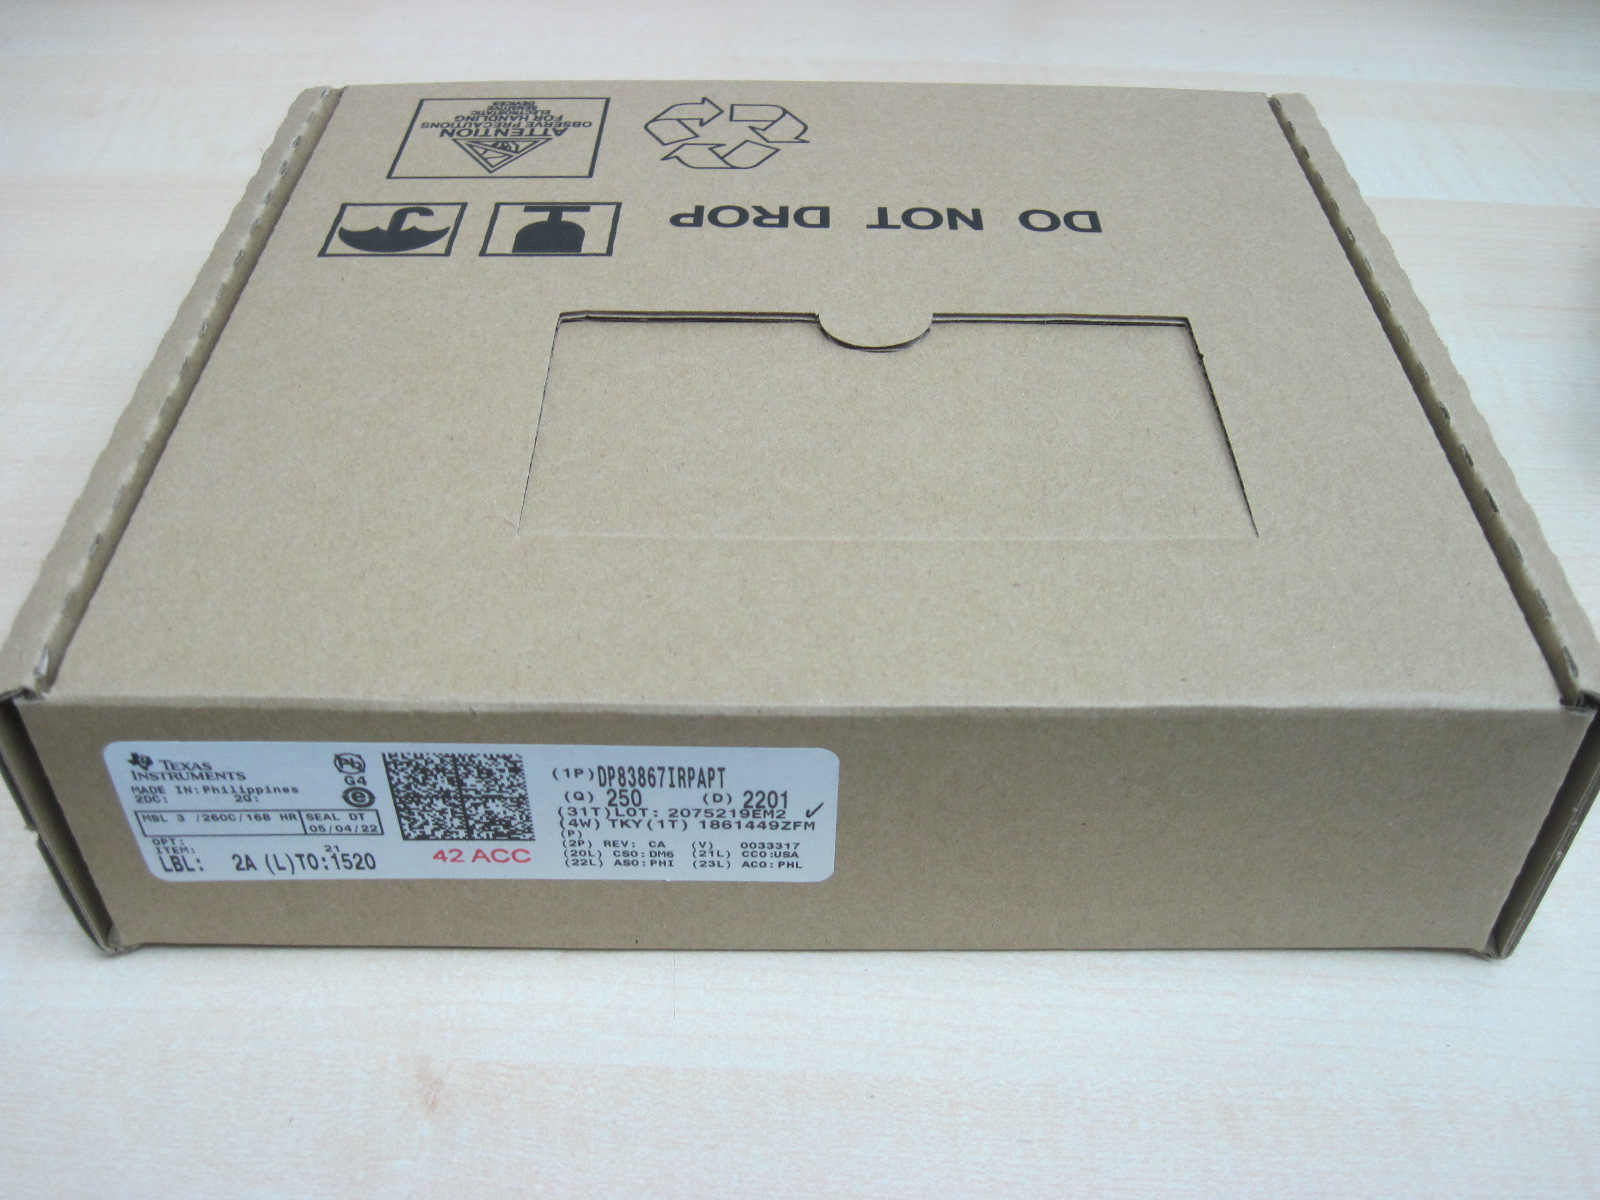 Packing box on table of TI brand